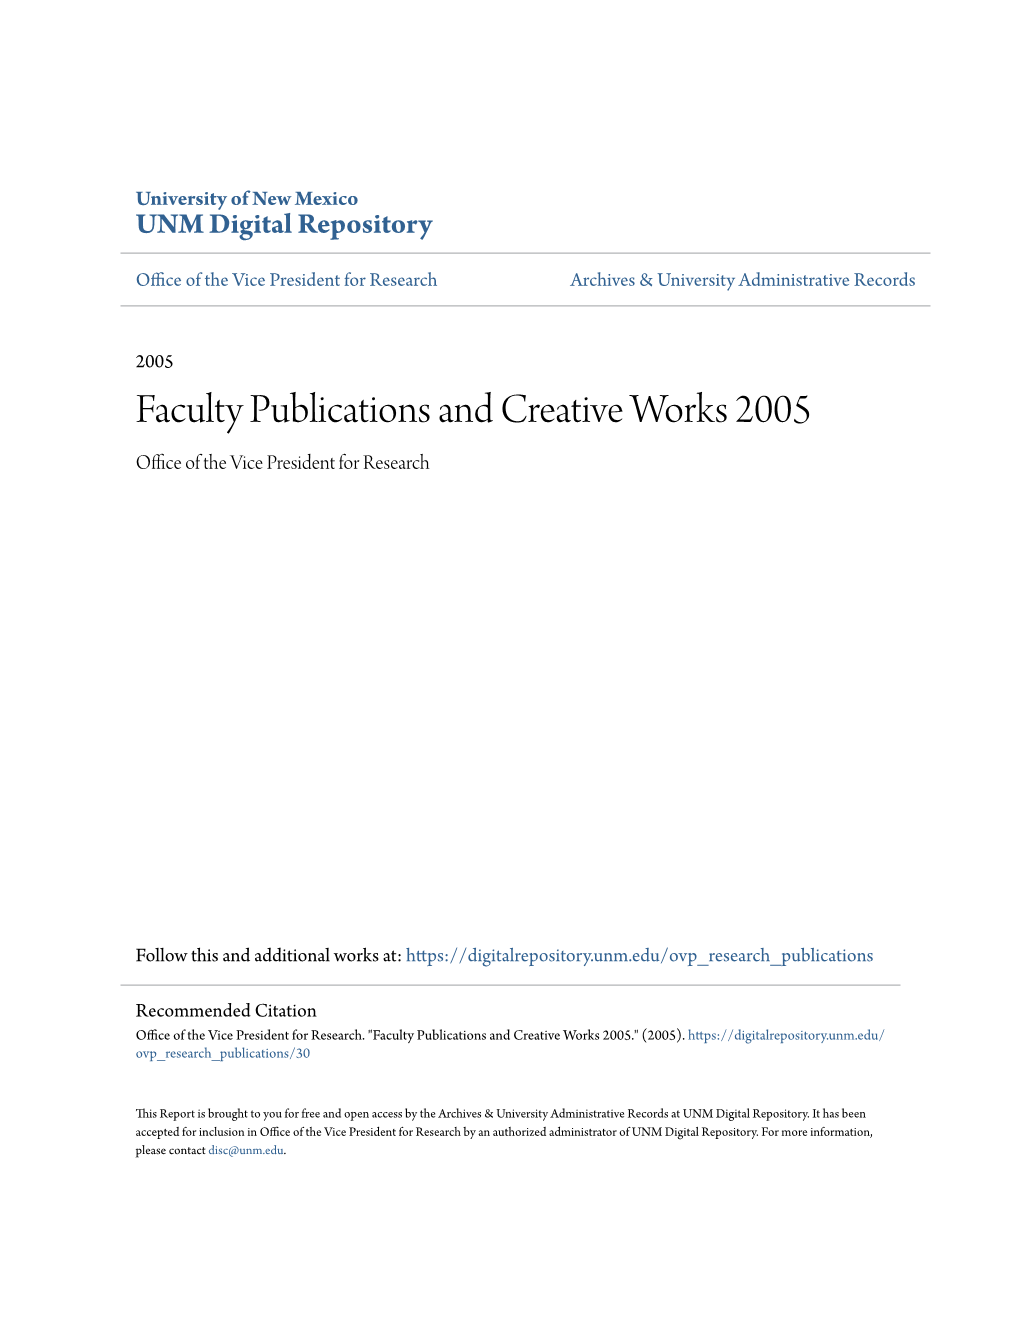 Faculty Publications and Creative Works 2005 Office of Theice V President for Research